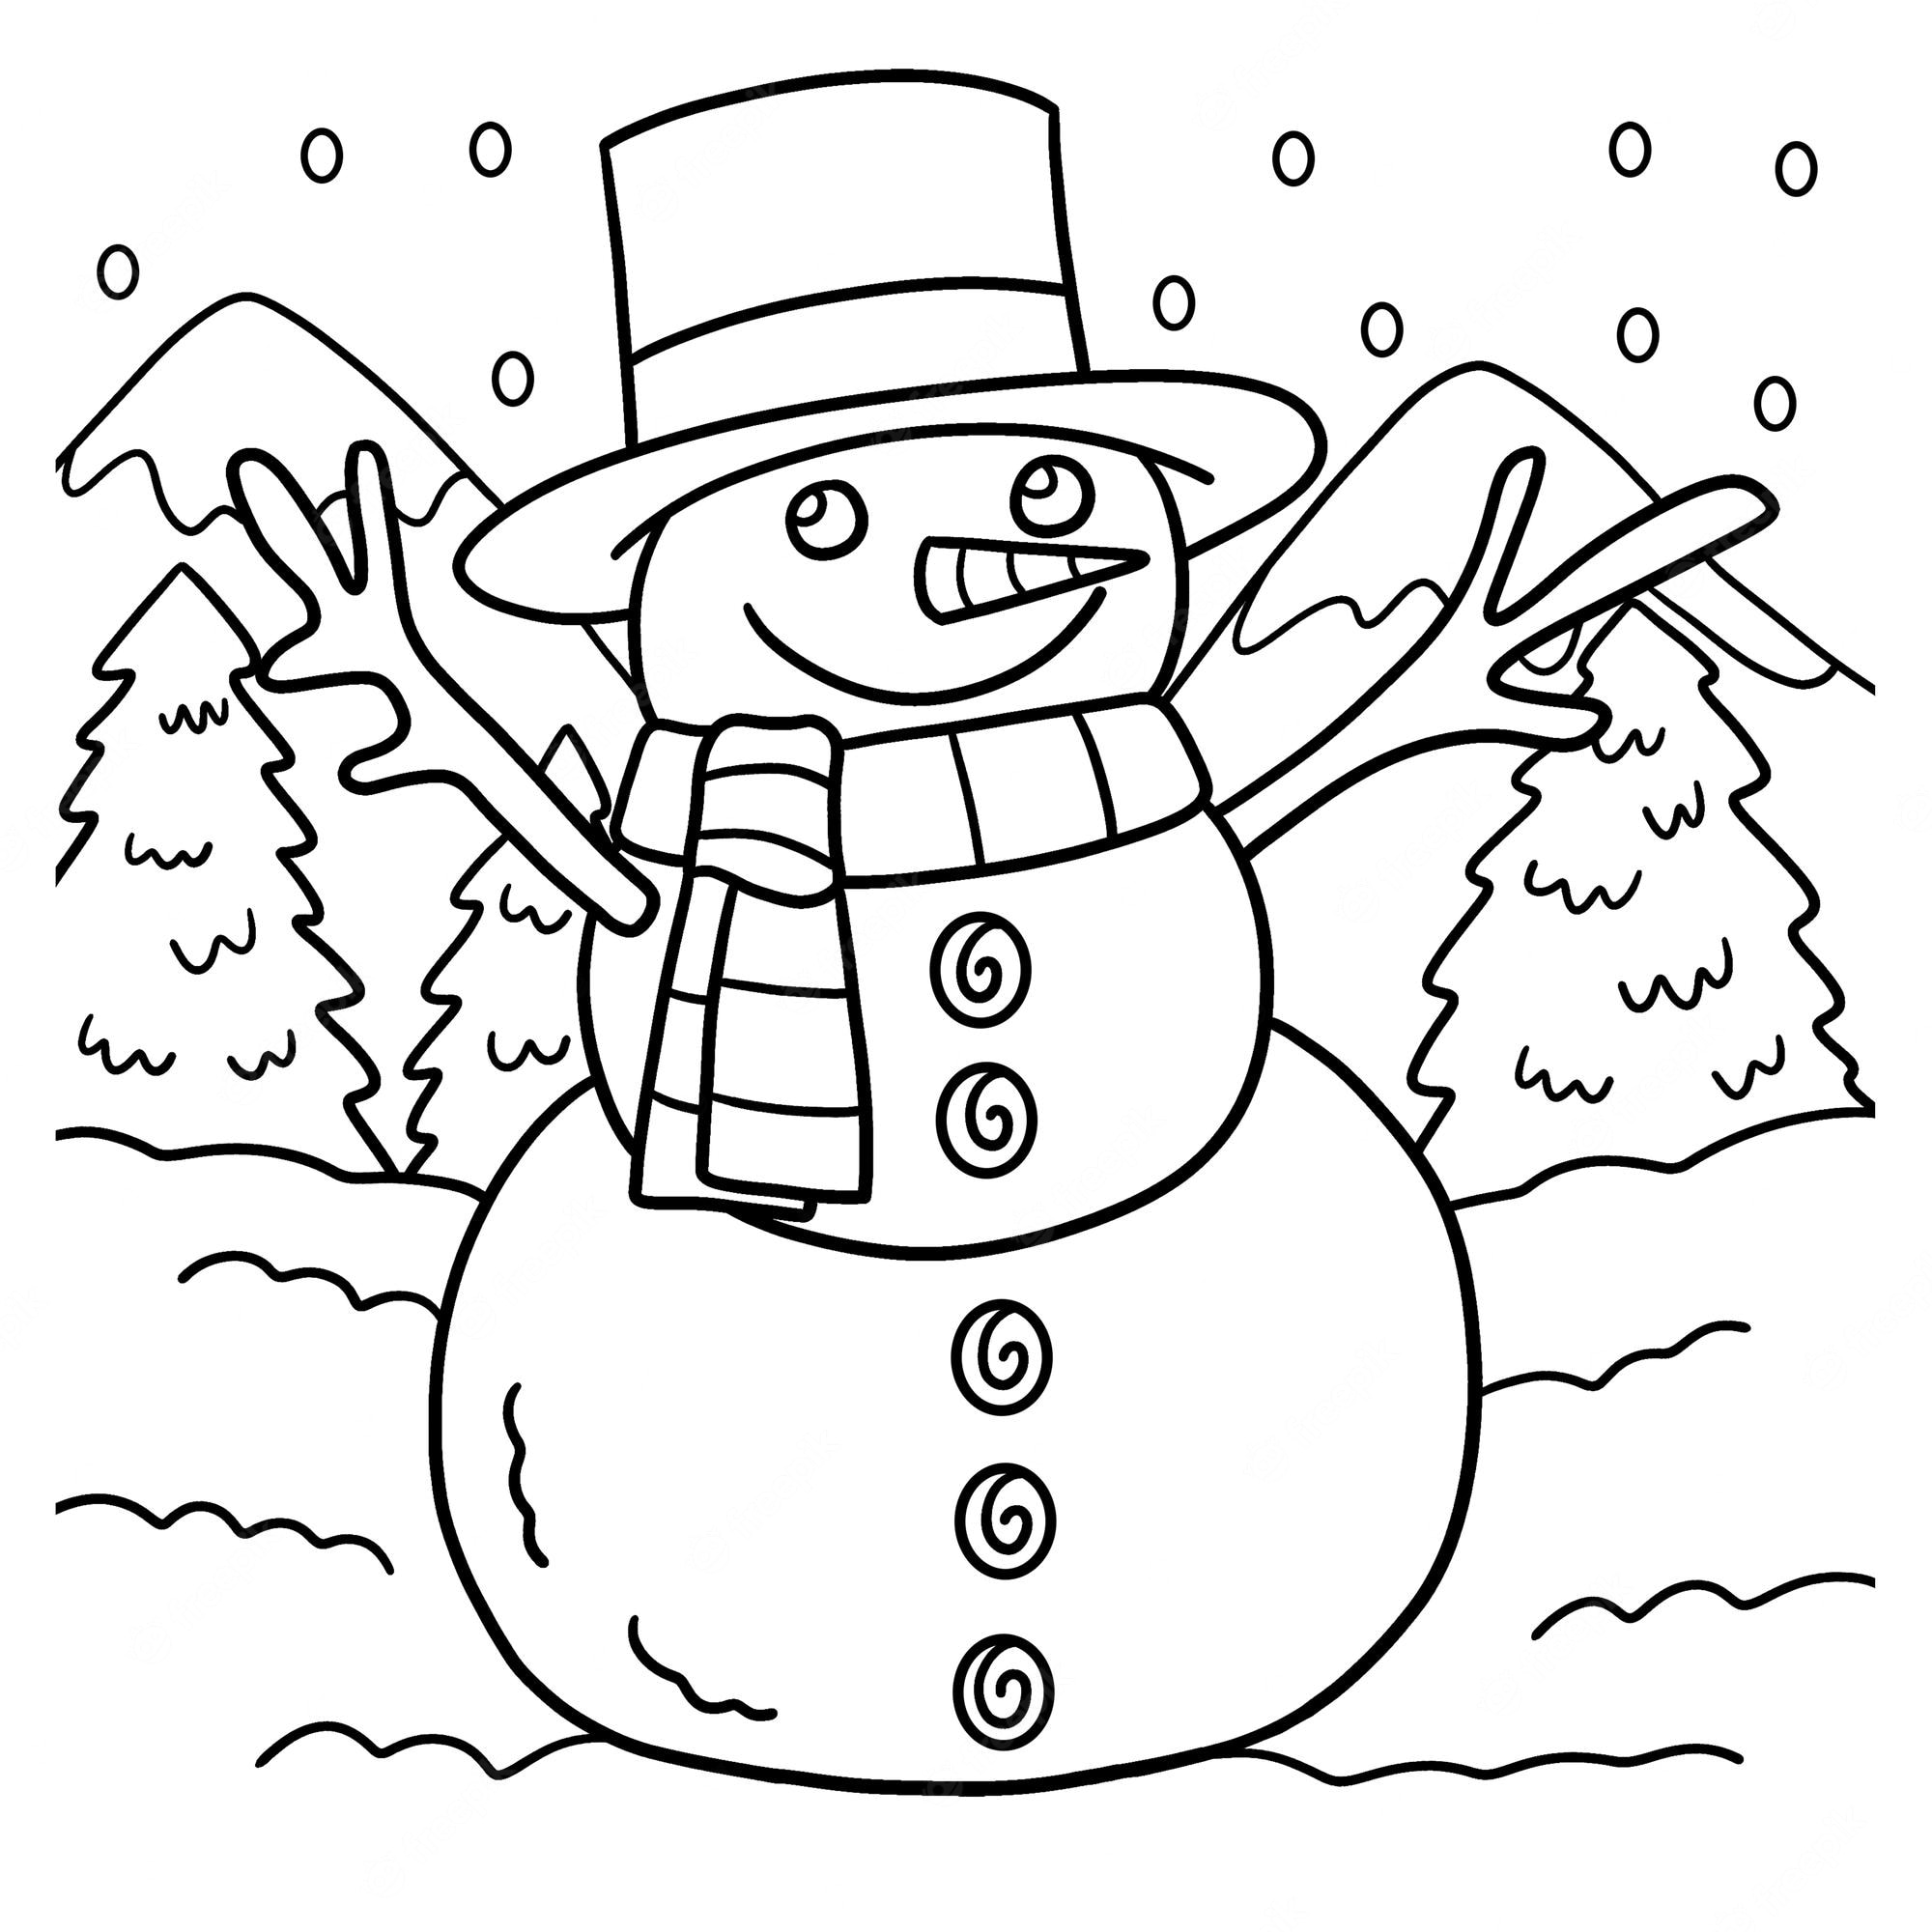 Snowman with examples #6